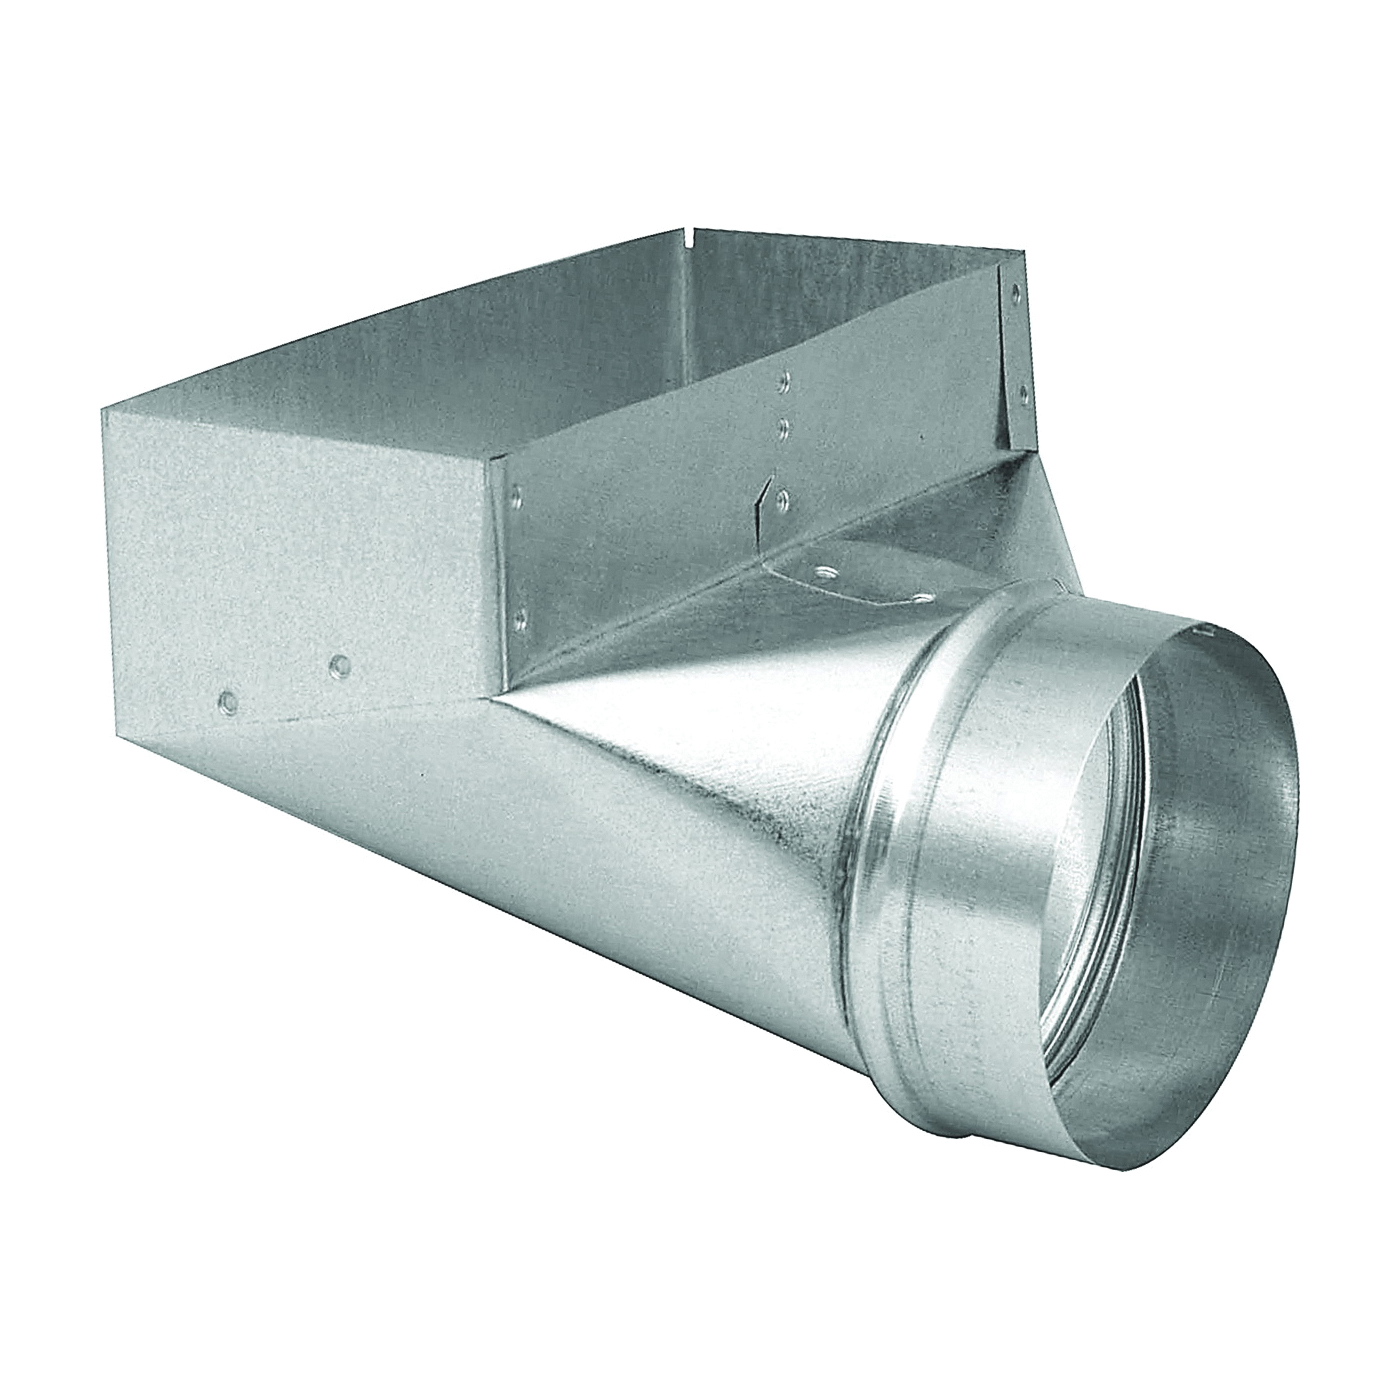 Imperial GV0627-C Wall Register Boot, 4 in L, 12 in W, 6 in H, 90 deg Angle, Galvanized - 1